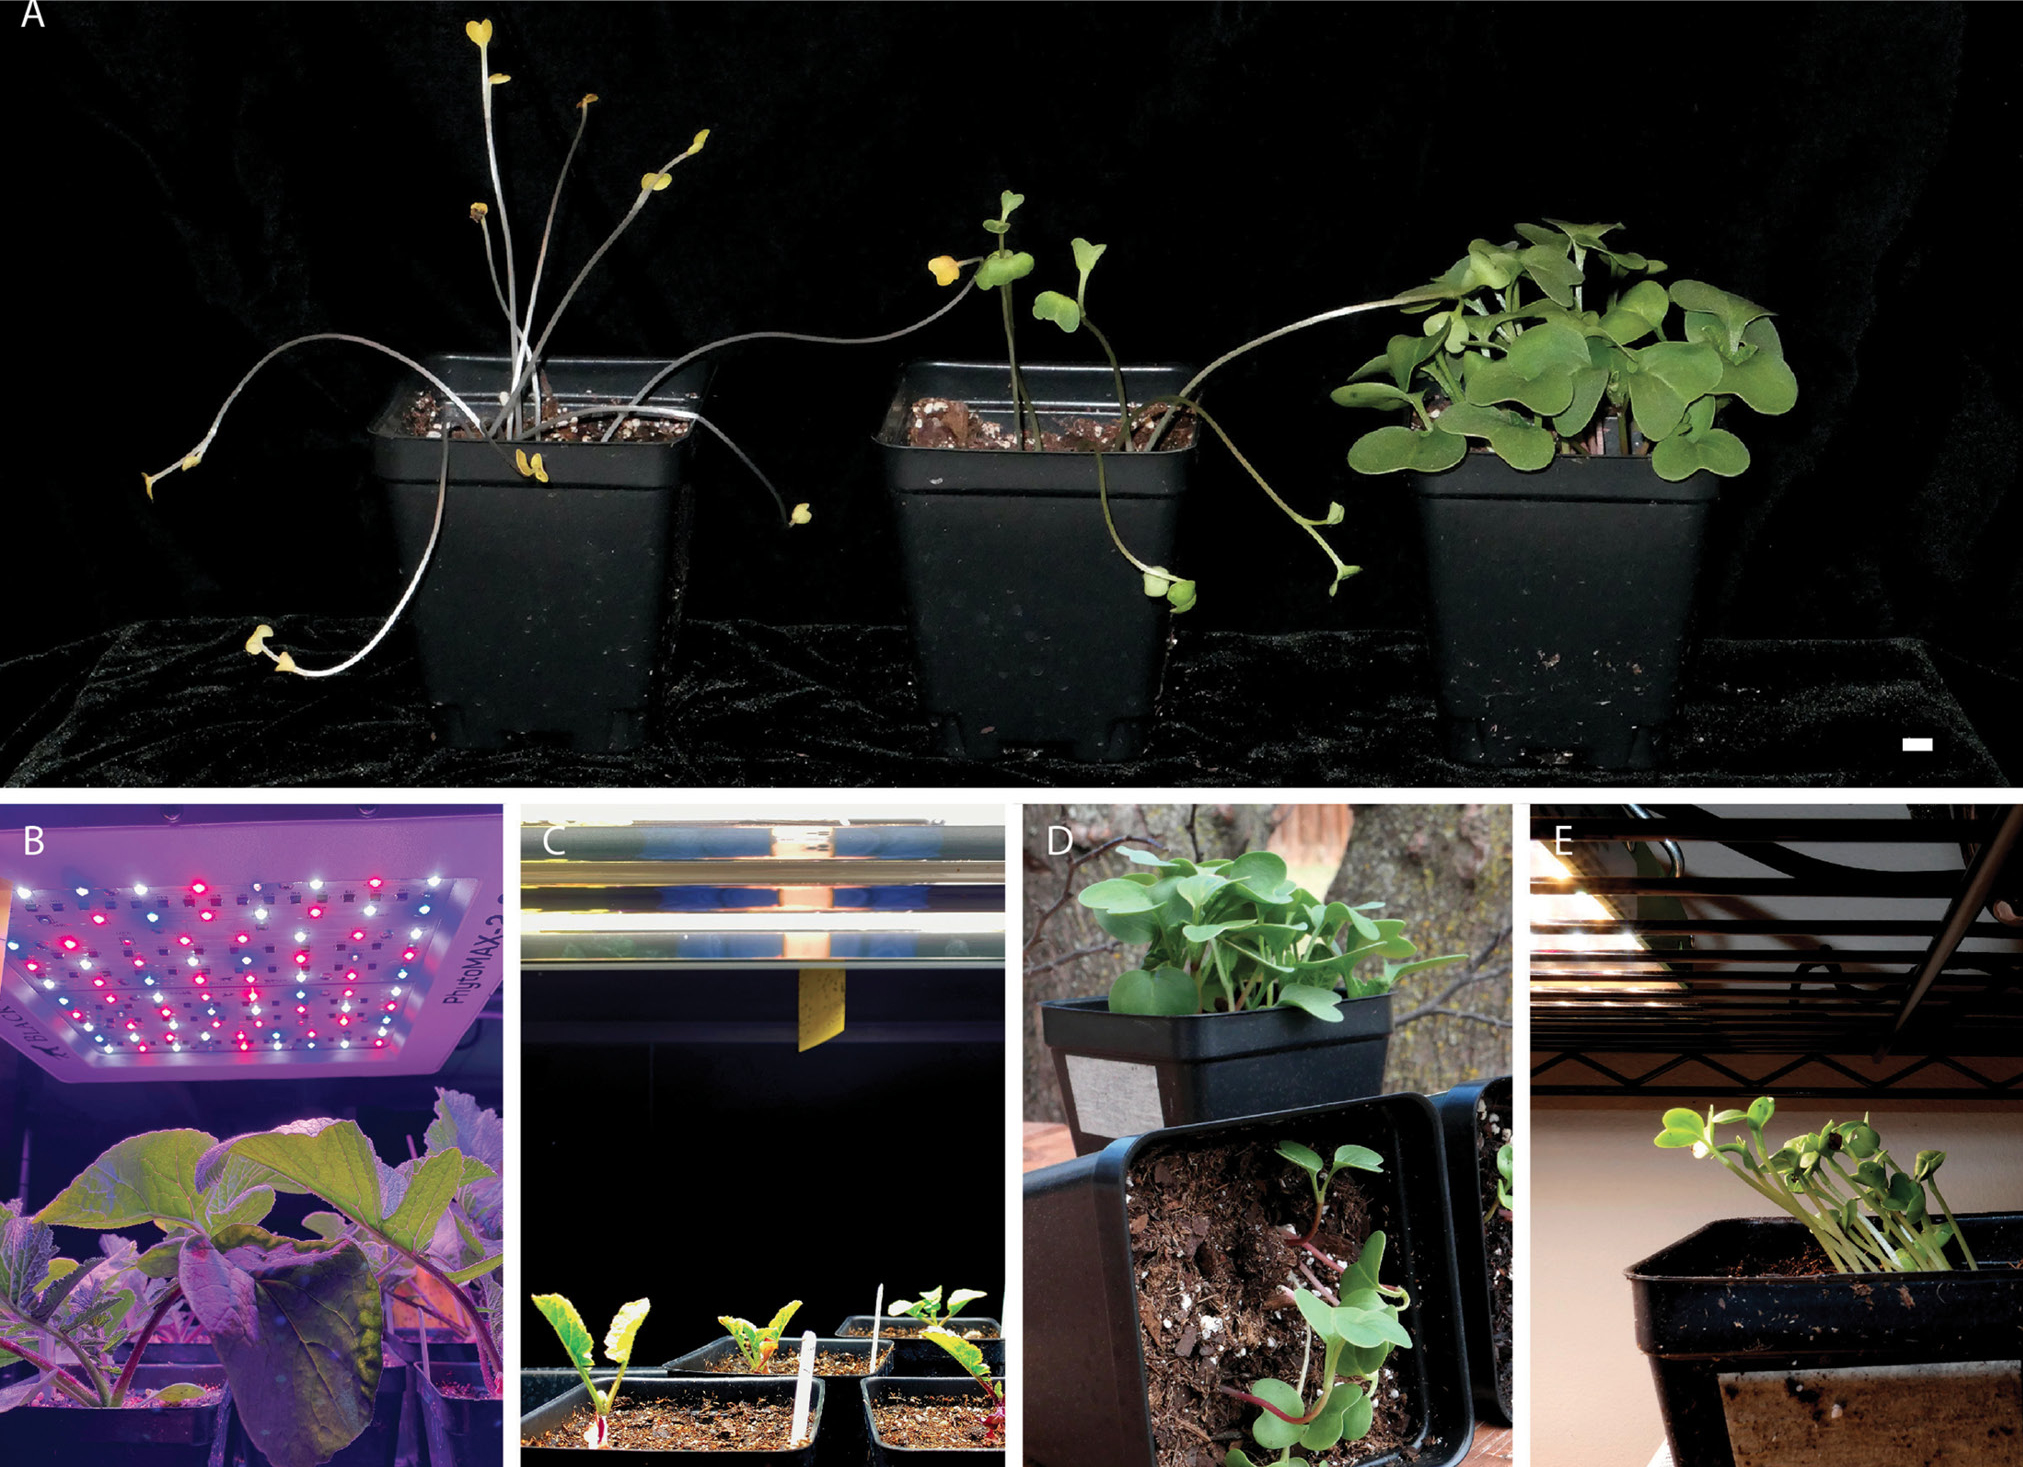 Figure 2  Radishes grown in a variety of lighting conditions: (A) from the left, radishes germinated in the dark, in dim light, and in bright light; (B) radishes growing under red and blue LED lights; (C) radishes growing under white fluorescent lights; (D) radish turned sideways during growth that has reoriented its growth upward toward the light and against gravity; (E) radish seedlings growing sideways toward a light source. All scale bars equal 1 cm.